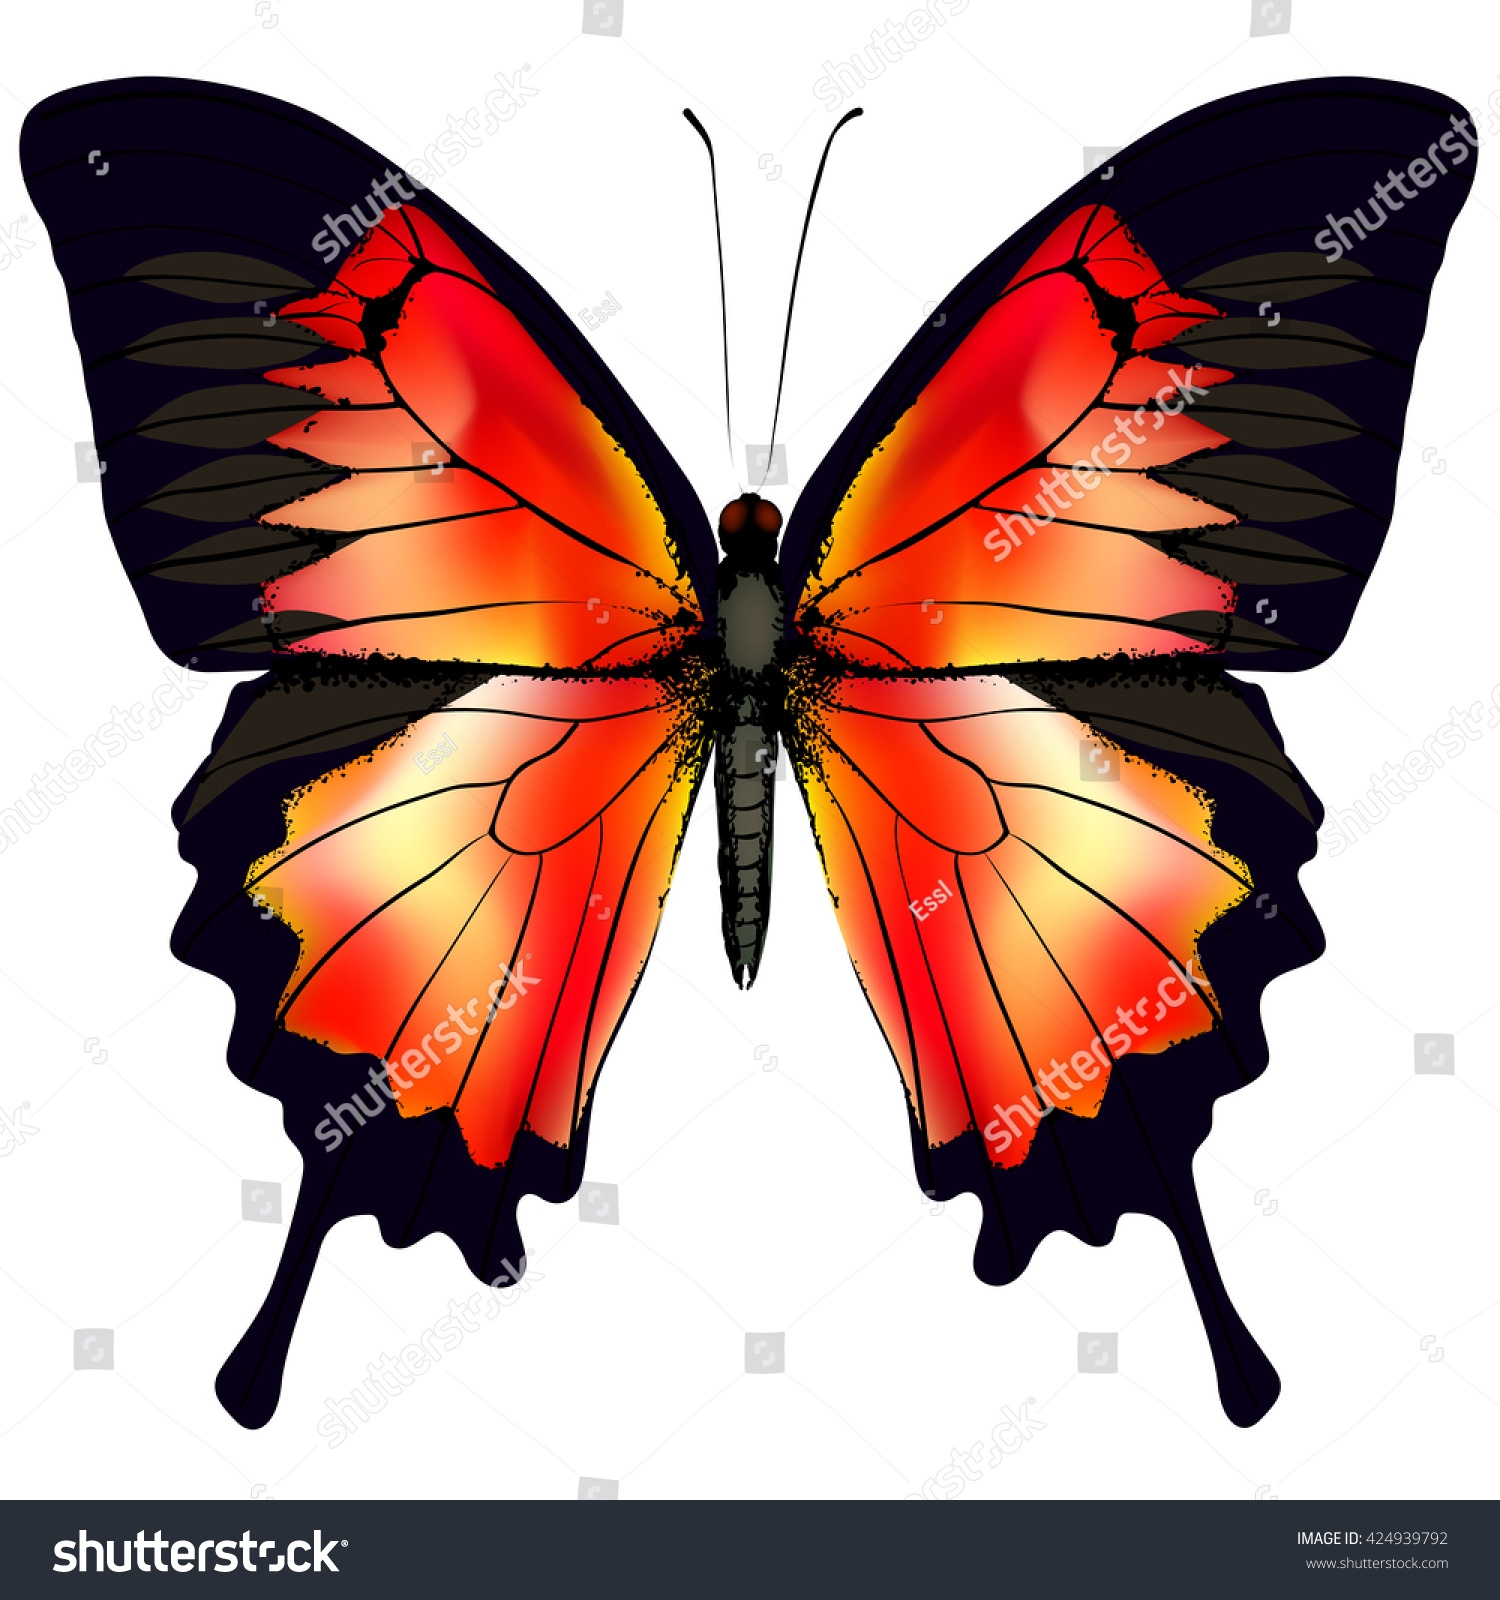 Butterfly Vector Illustration Beautiful Red Butterfly ...